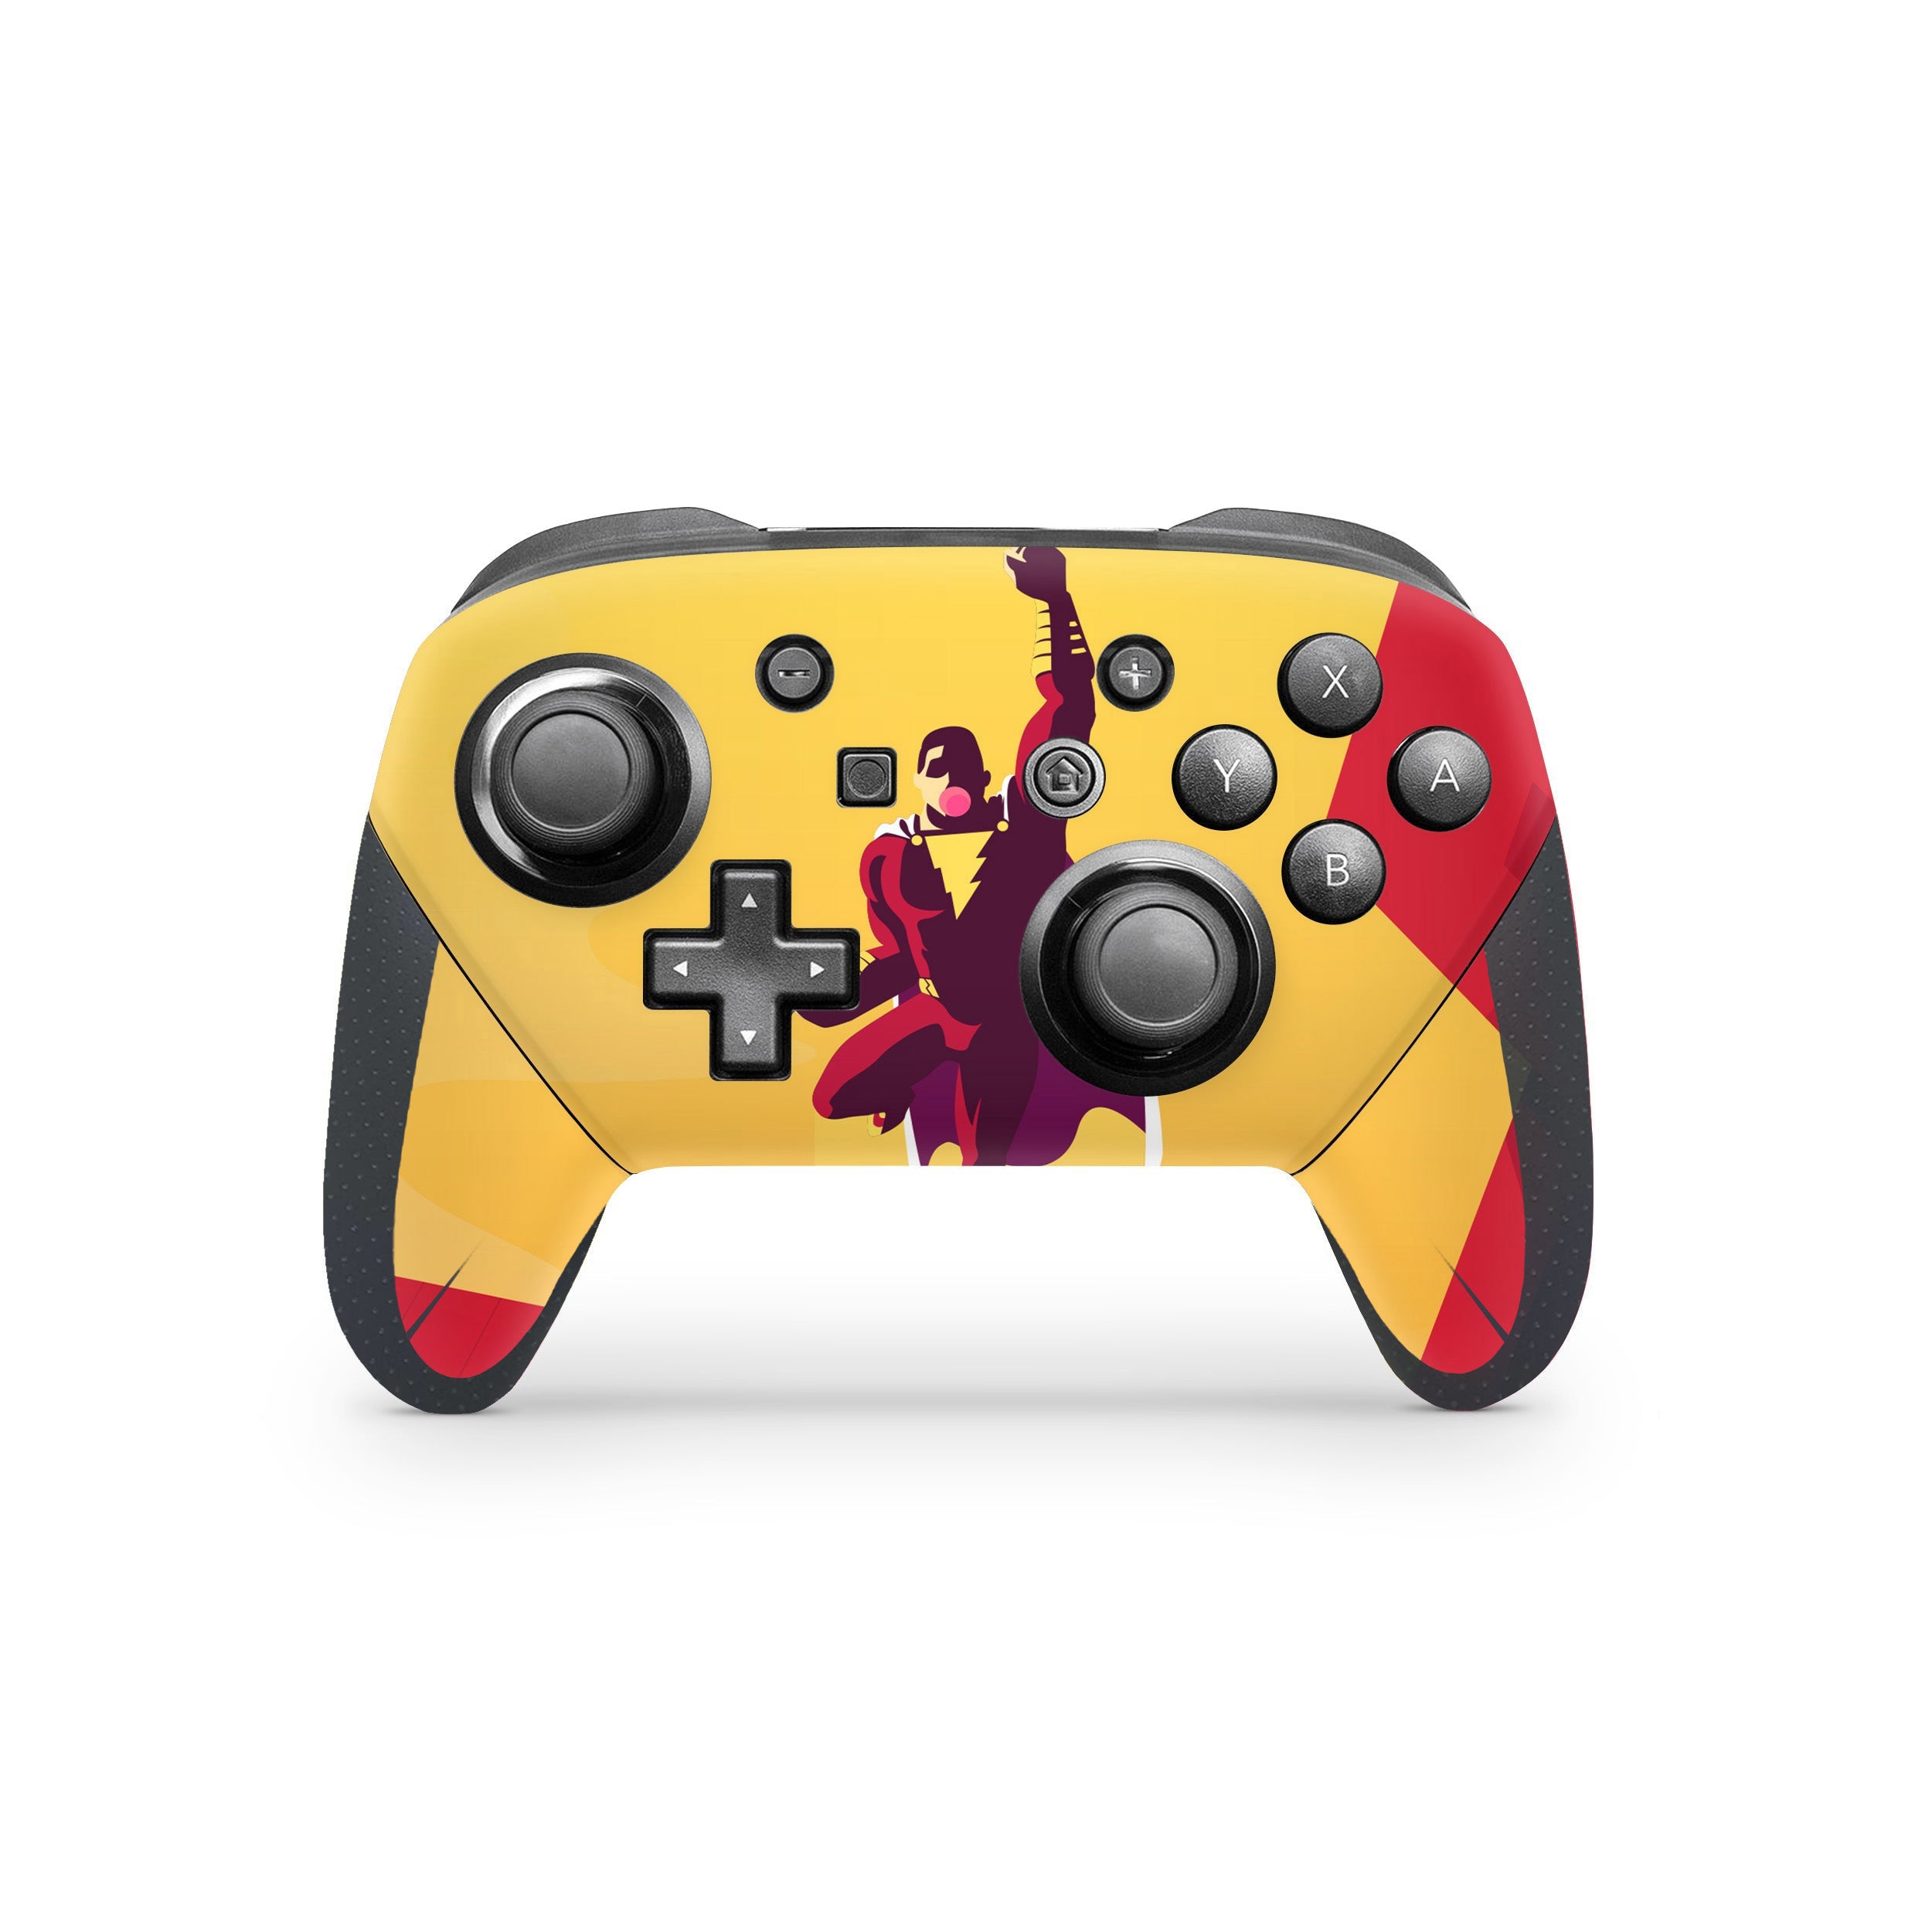 A video game skin featuring a DC Comics Shazam design for the Switch Pro Controller.